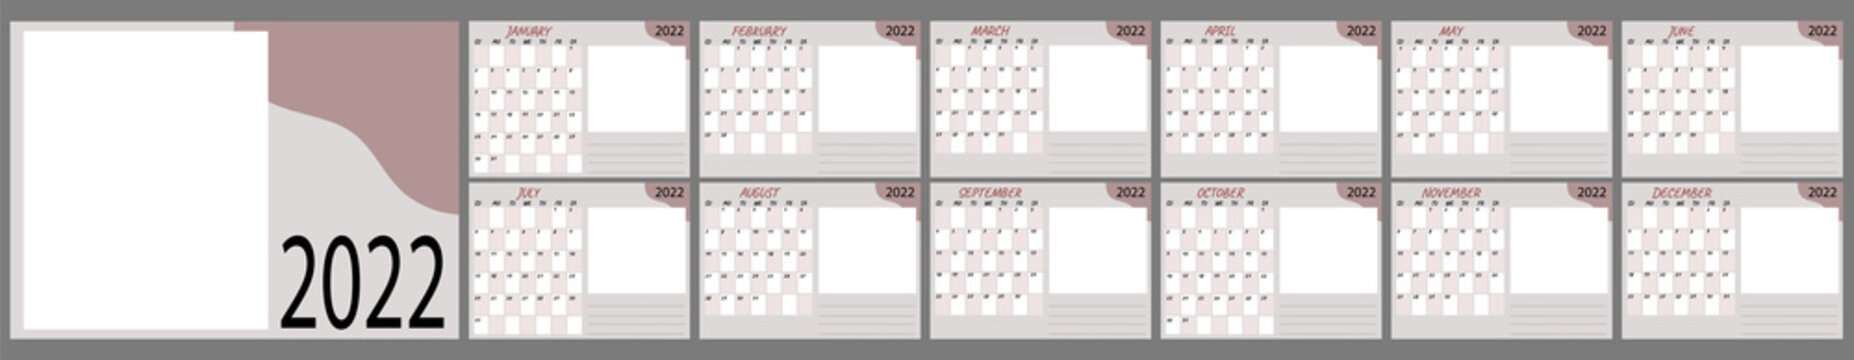 Calendar template for 2021. Set of 12 months and covers. Daily planner with grid table, with space for notes and photos. Vector illustration. horizontal wall or tabletop Corporate, business calendar